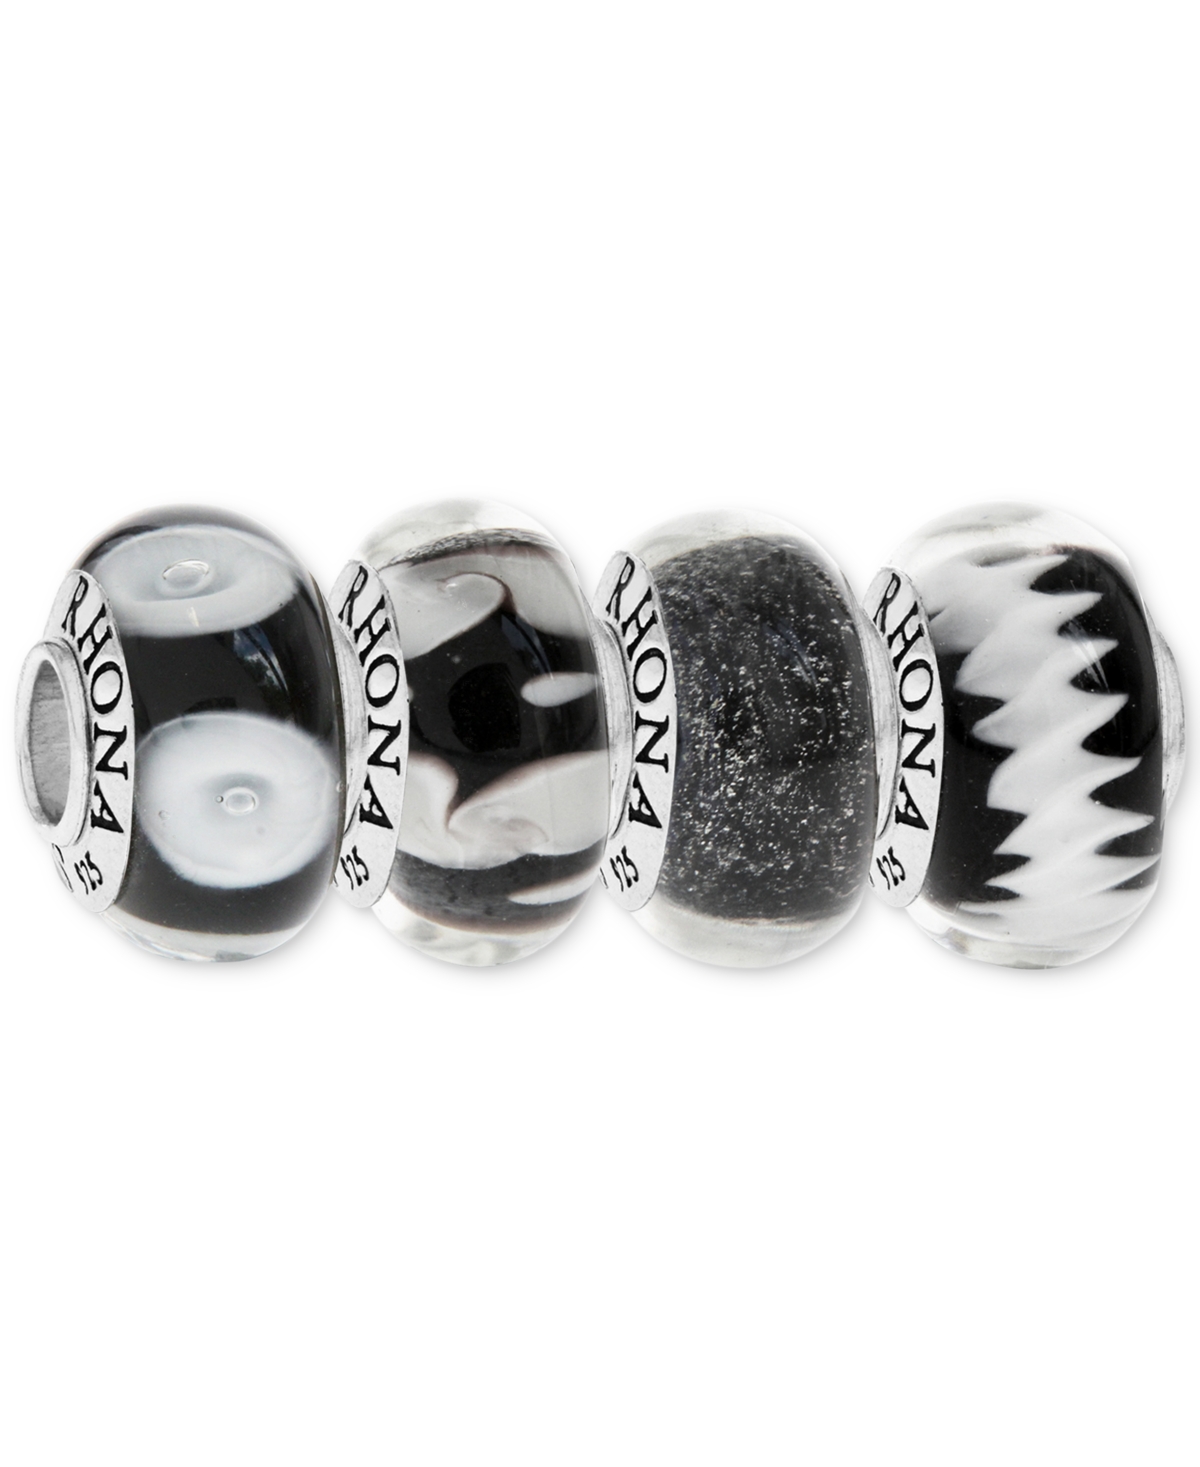 4-Pc. Set Painted Glass Bead Charms in Sterling Silver - Black